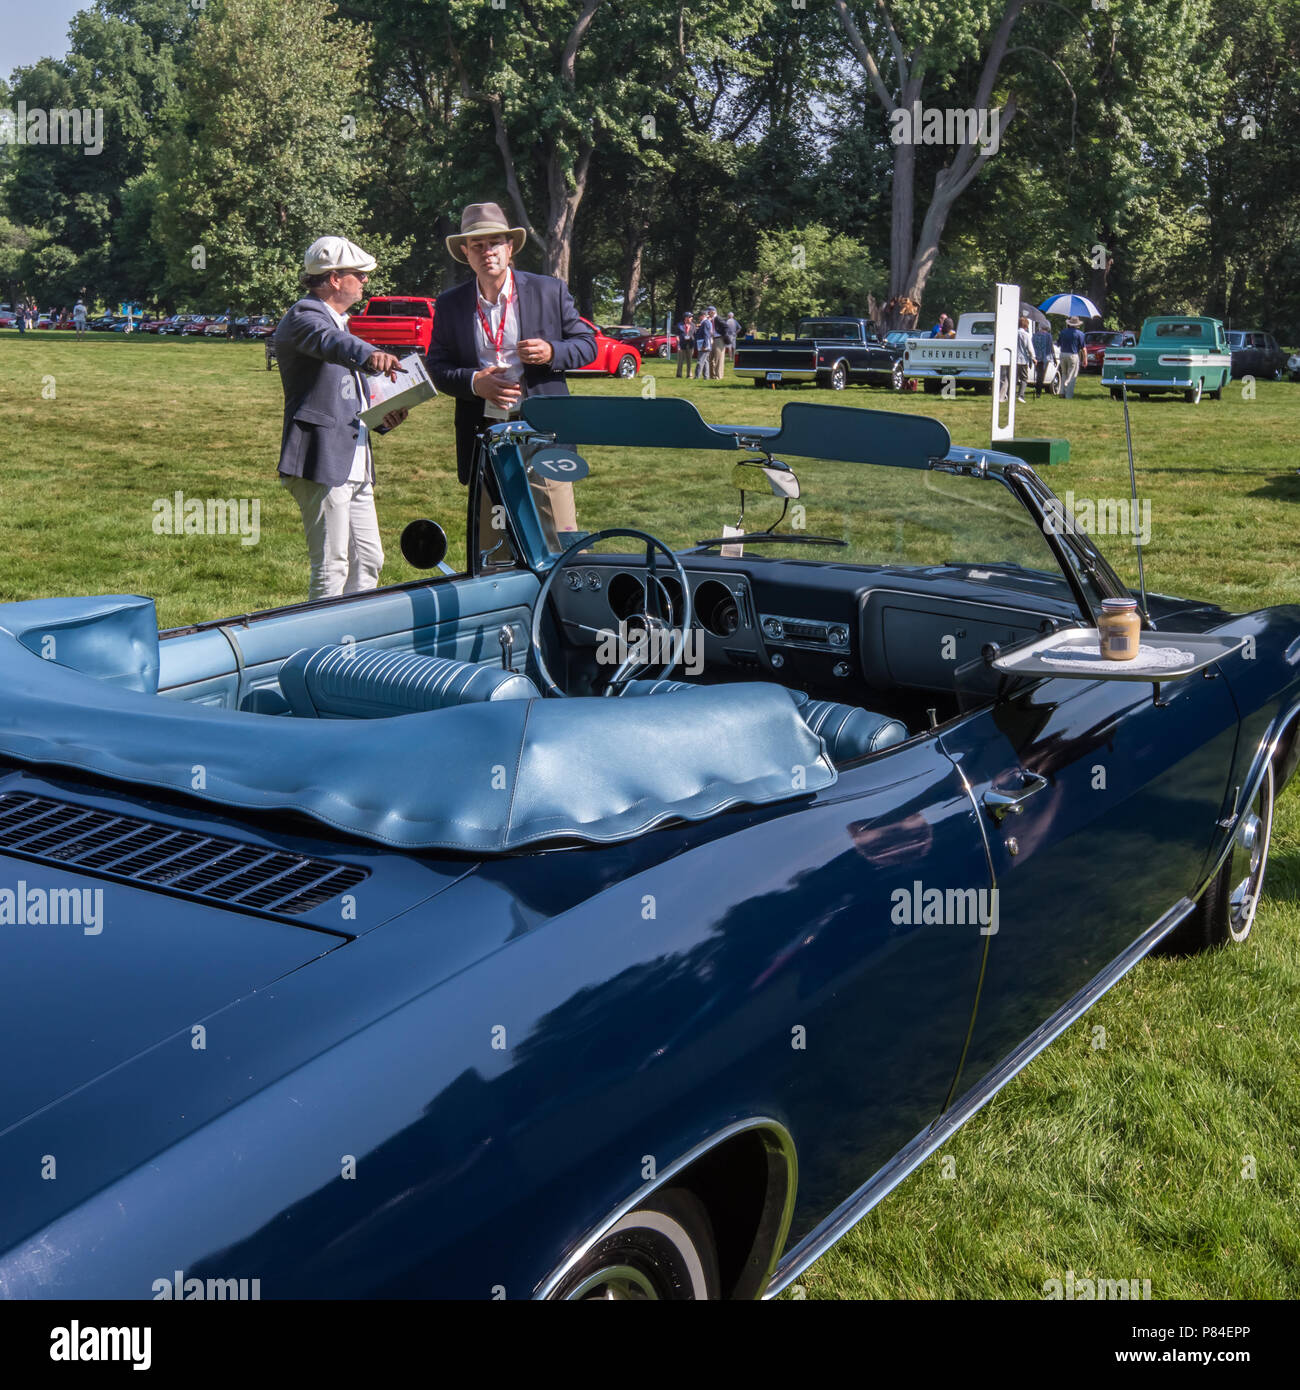 GROSSE POINTE SHORES, MI/USA - JUNE 17, 2018: Judges review a Chevrolet Corvair car at the EyesOn Design show, at the Edsel and Eleanor Ford house. Stock Photo